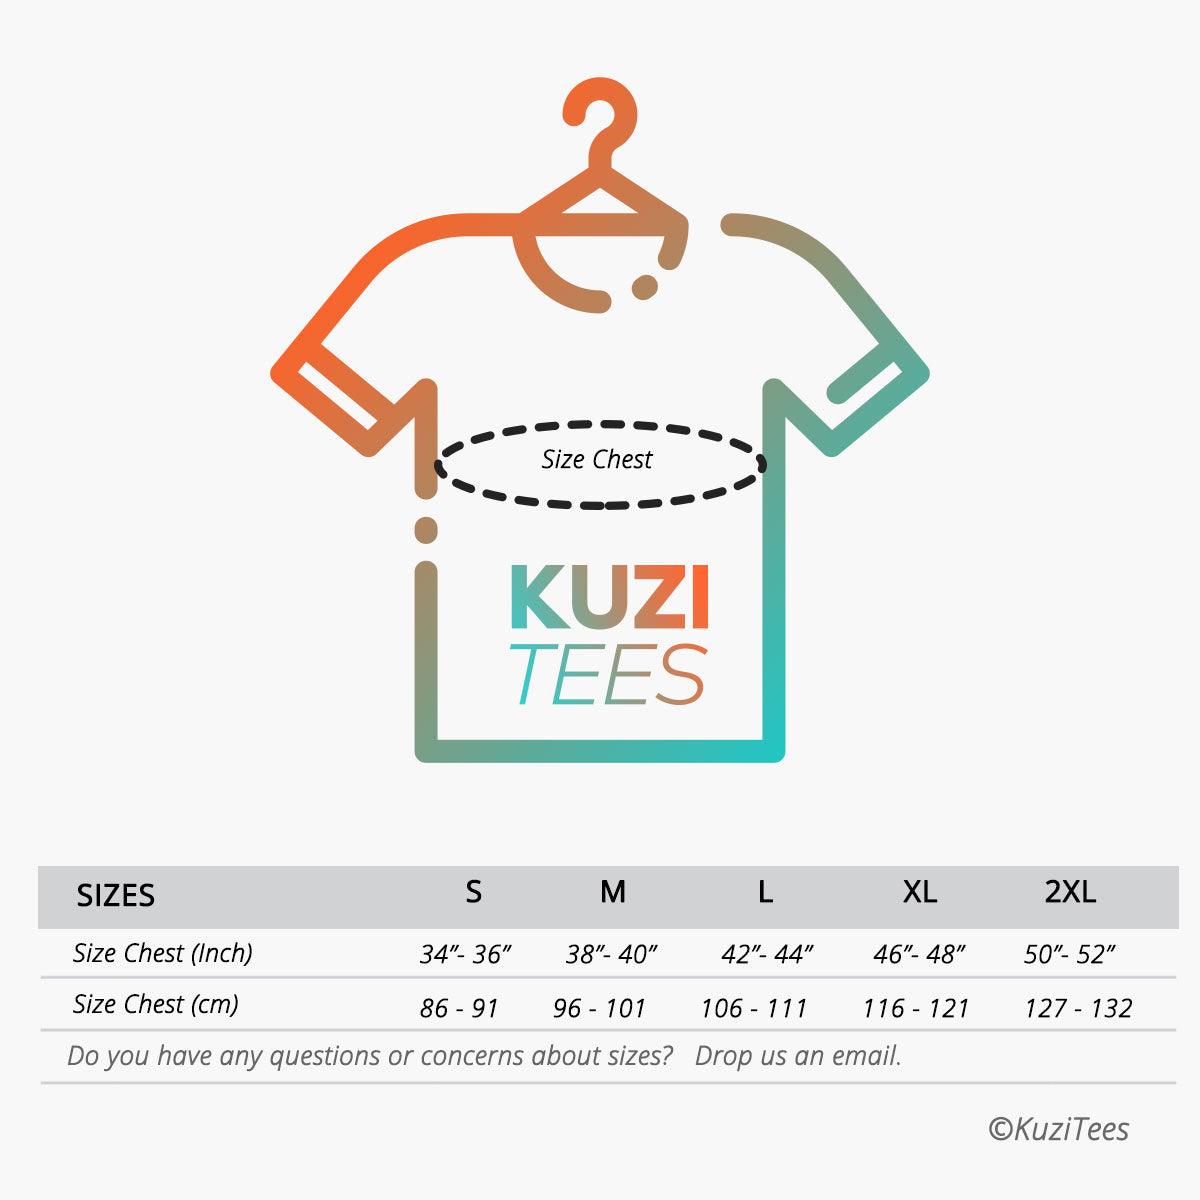 Hyperastro Retro game character - Old Fashioned Computer Gaming - Kuzi Tees